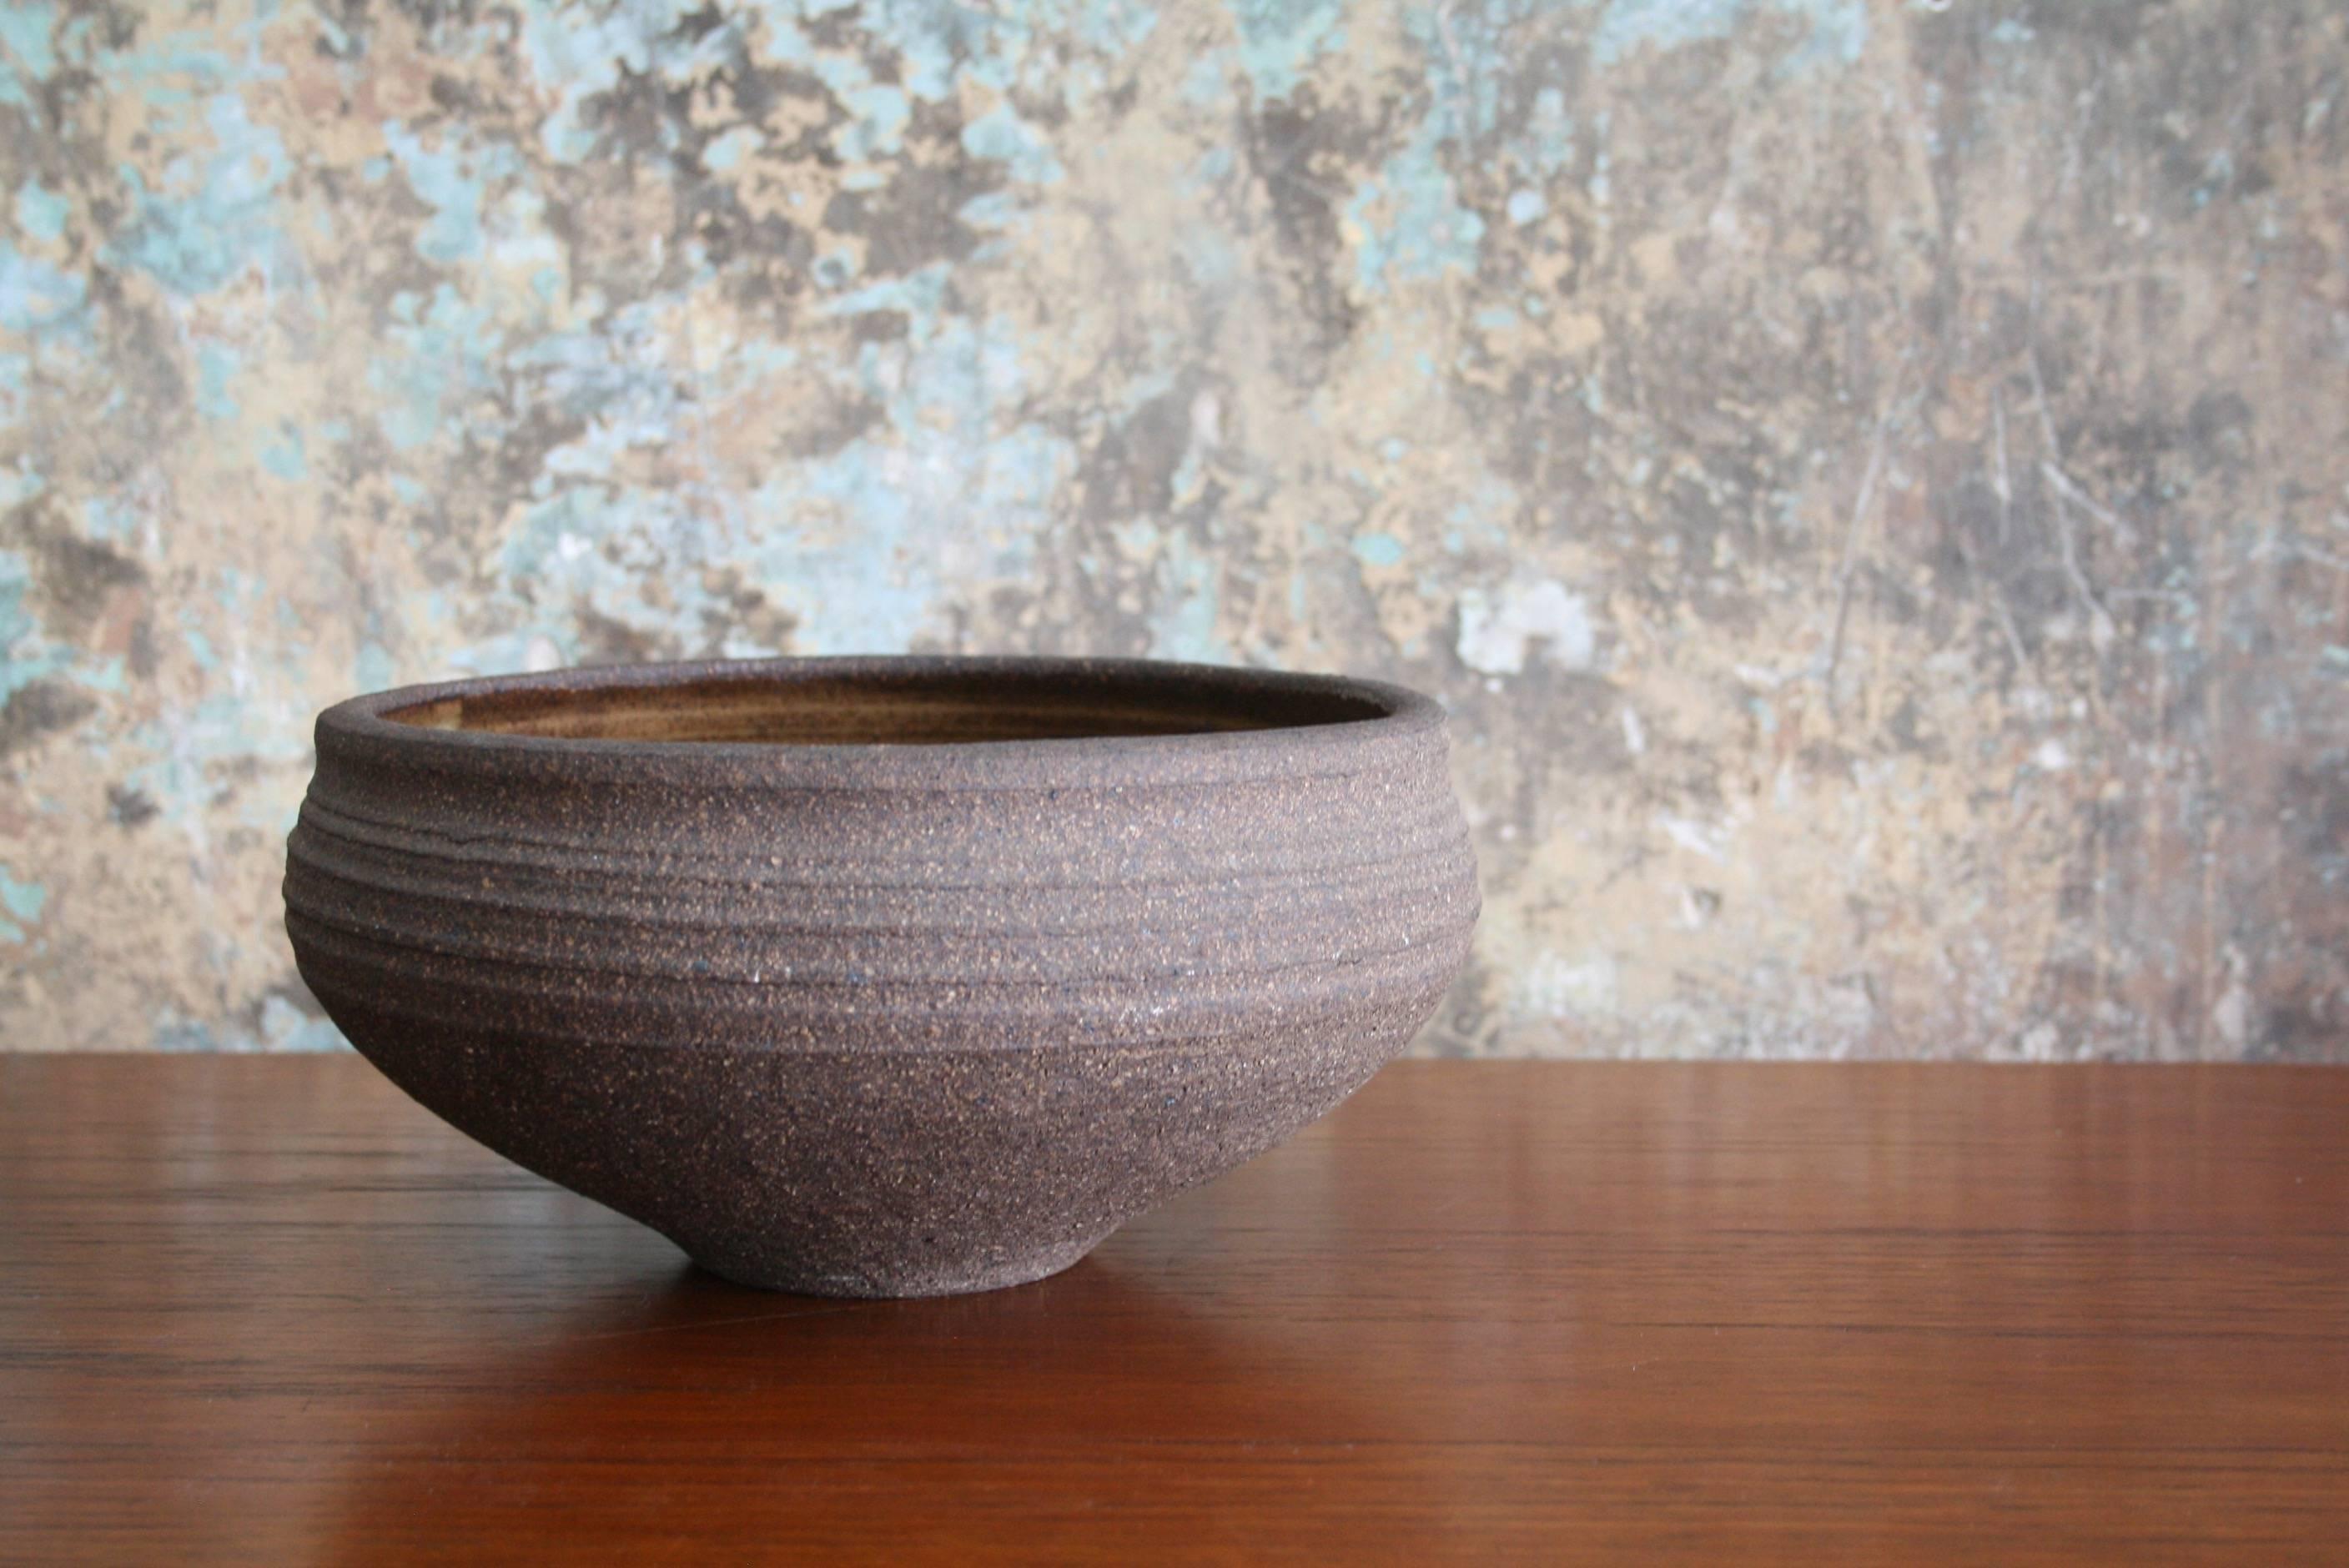 A functional hand thrown stoneware bowl by highly regarded artist Karen Karnes (American, 1925-2016). The wheel-thrown bowl features a glossy mottled eggshell liner glaze, a rough exterior surface with a rich, deep brown earth color, and a mild